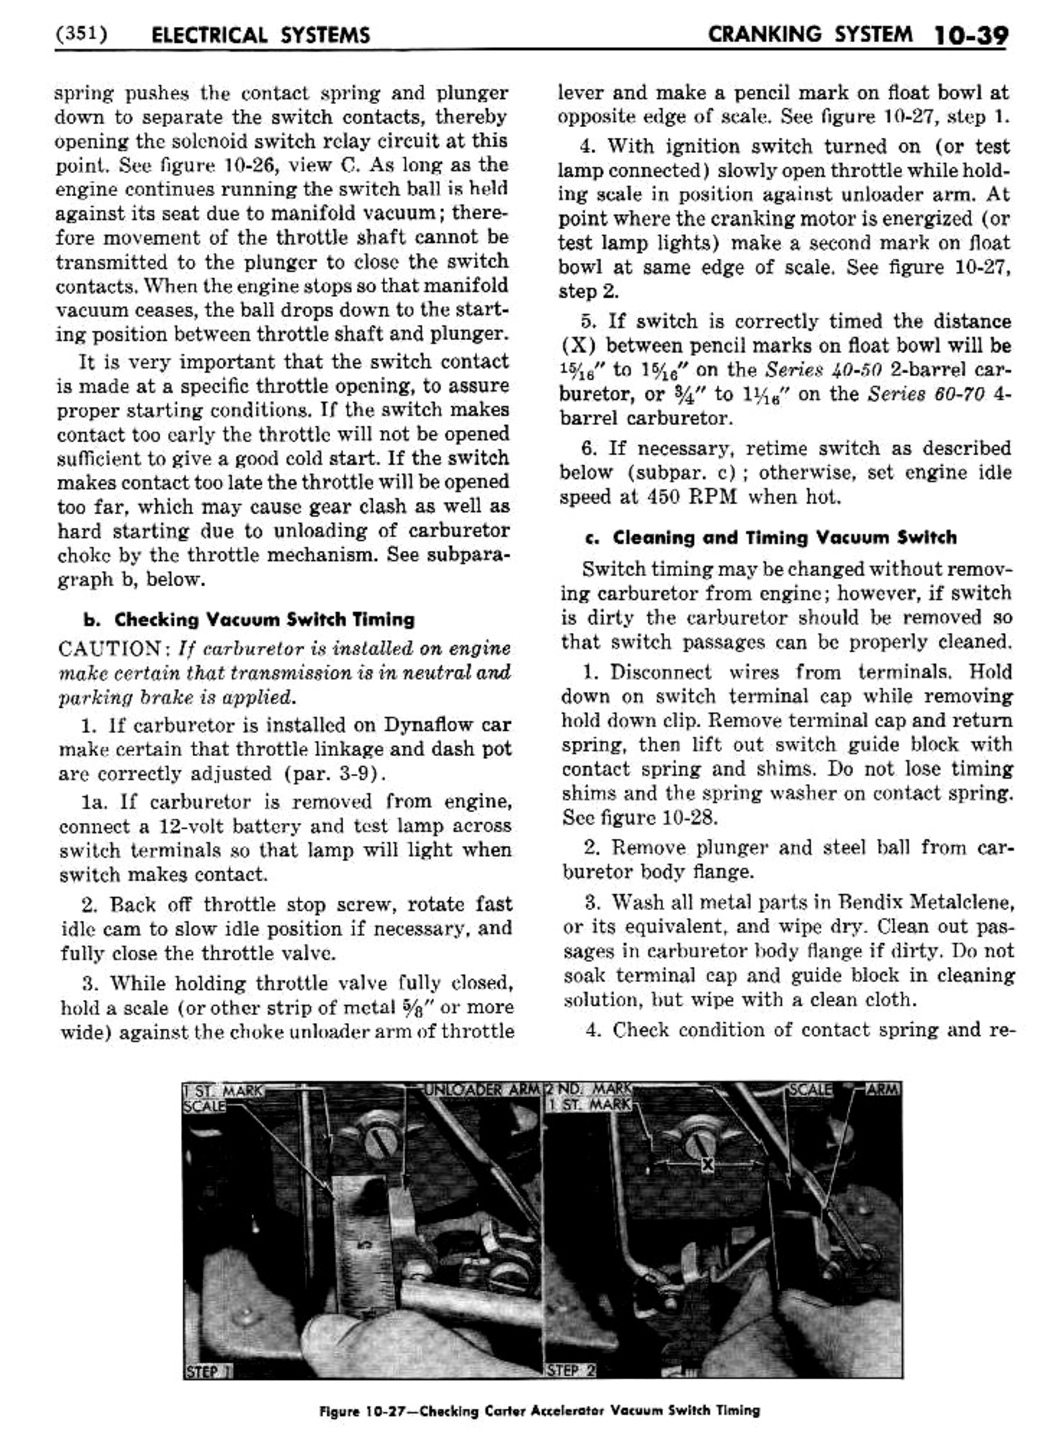 n_11 1954 Buick Shop Manual - Electrical Systems-039-039.jpg